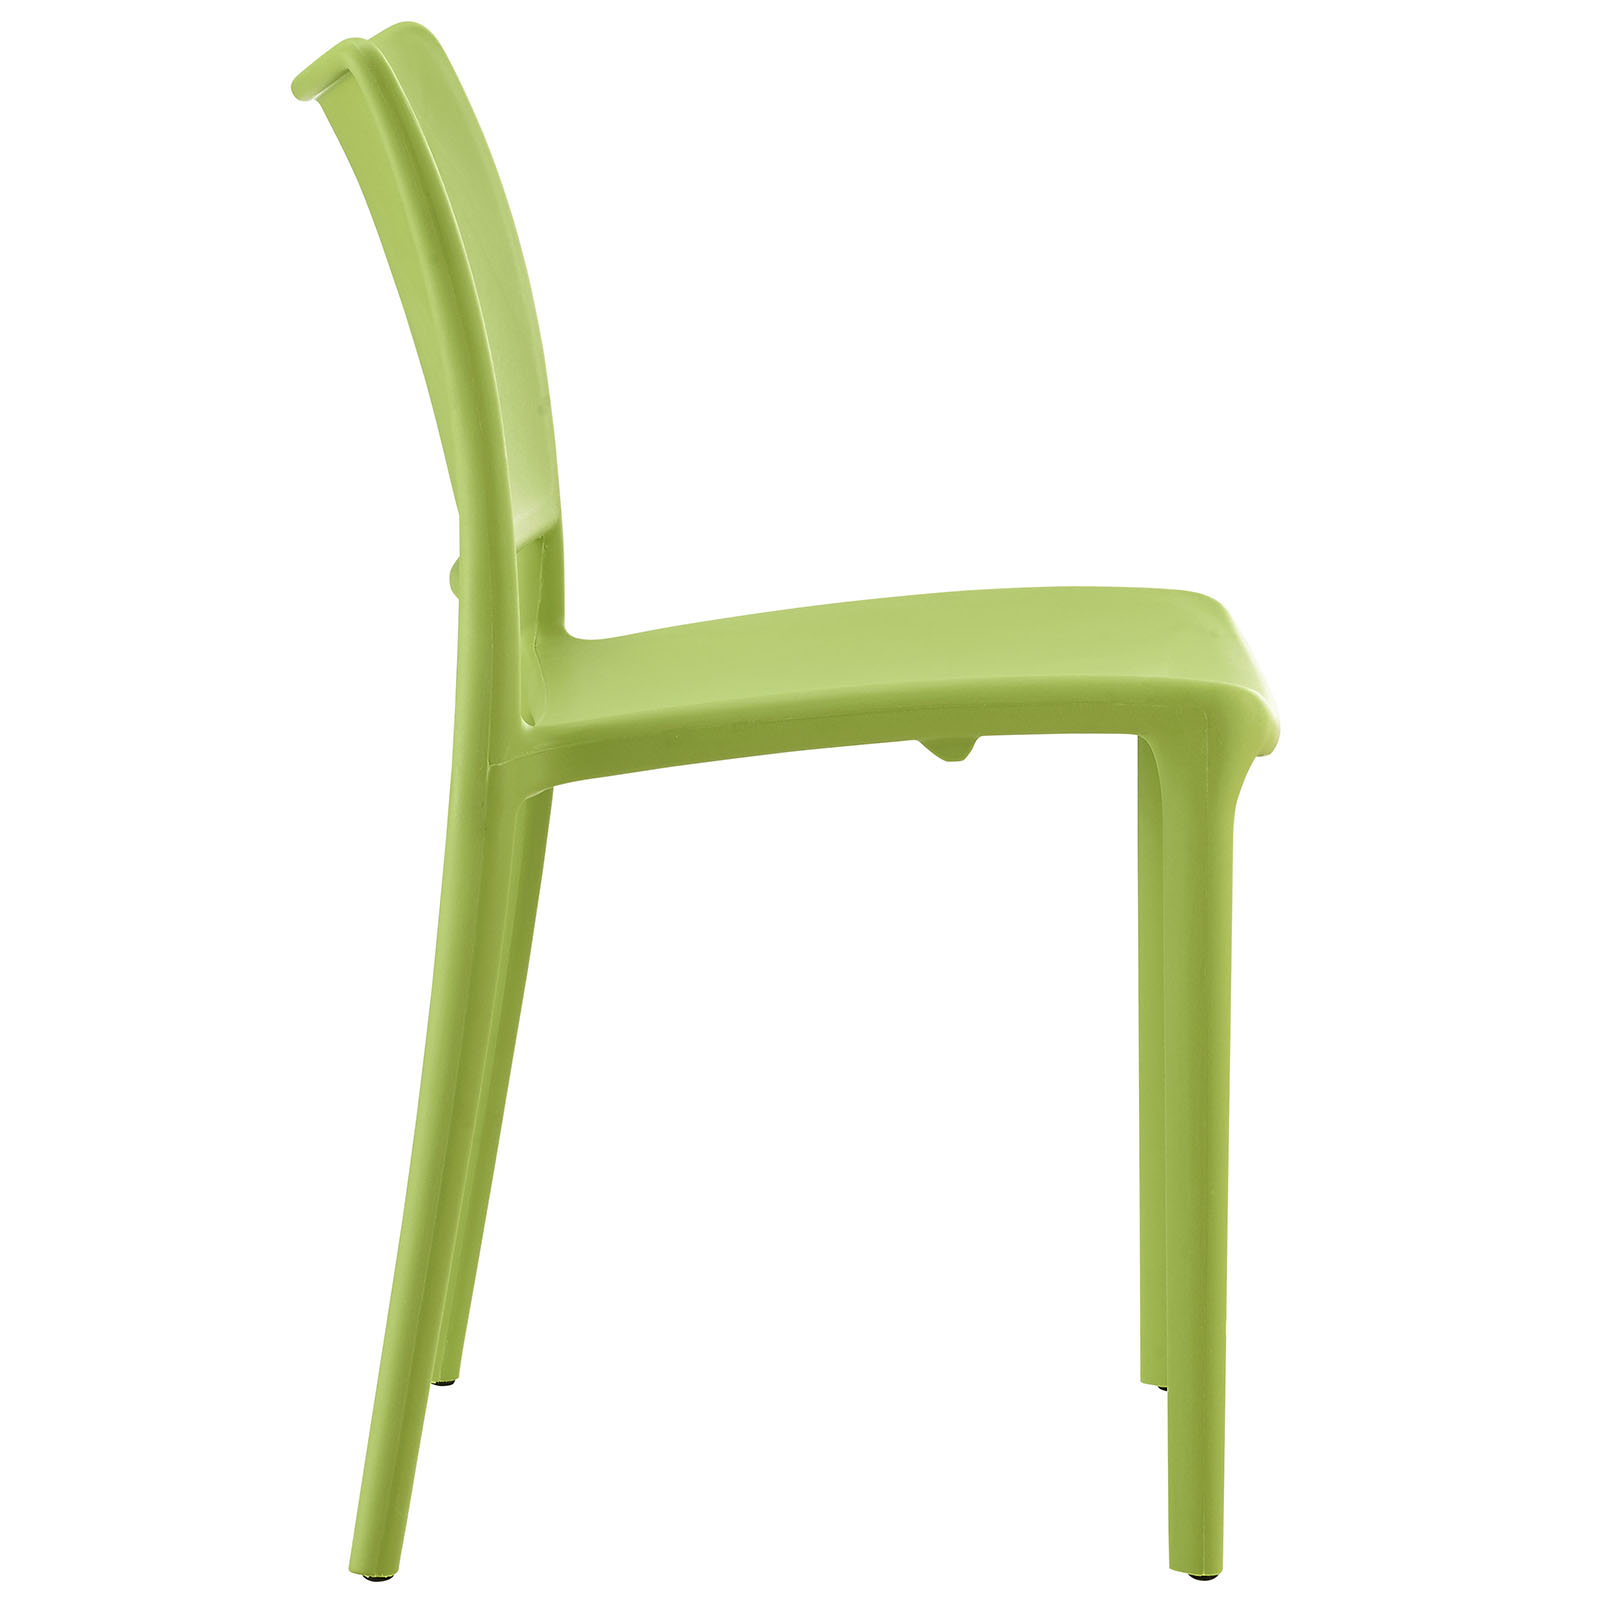 Modern Contemporary Urban Design Outdoor Kitchen Room Dining Chair ( Set of 2), Green, Plastic - image 3 of 4